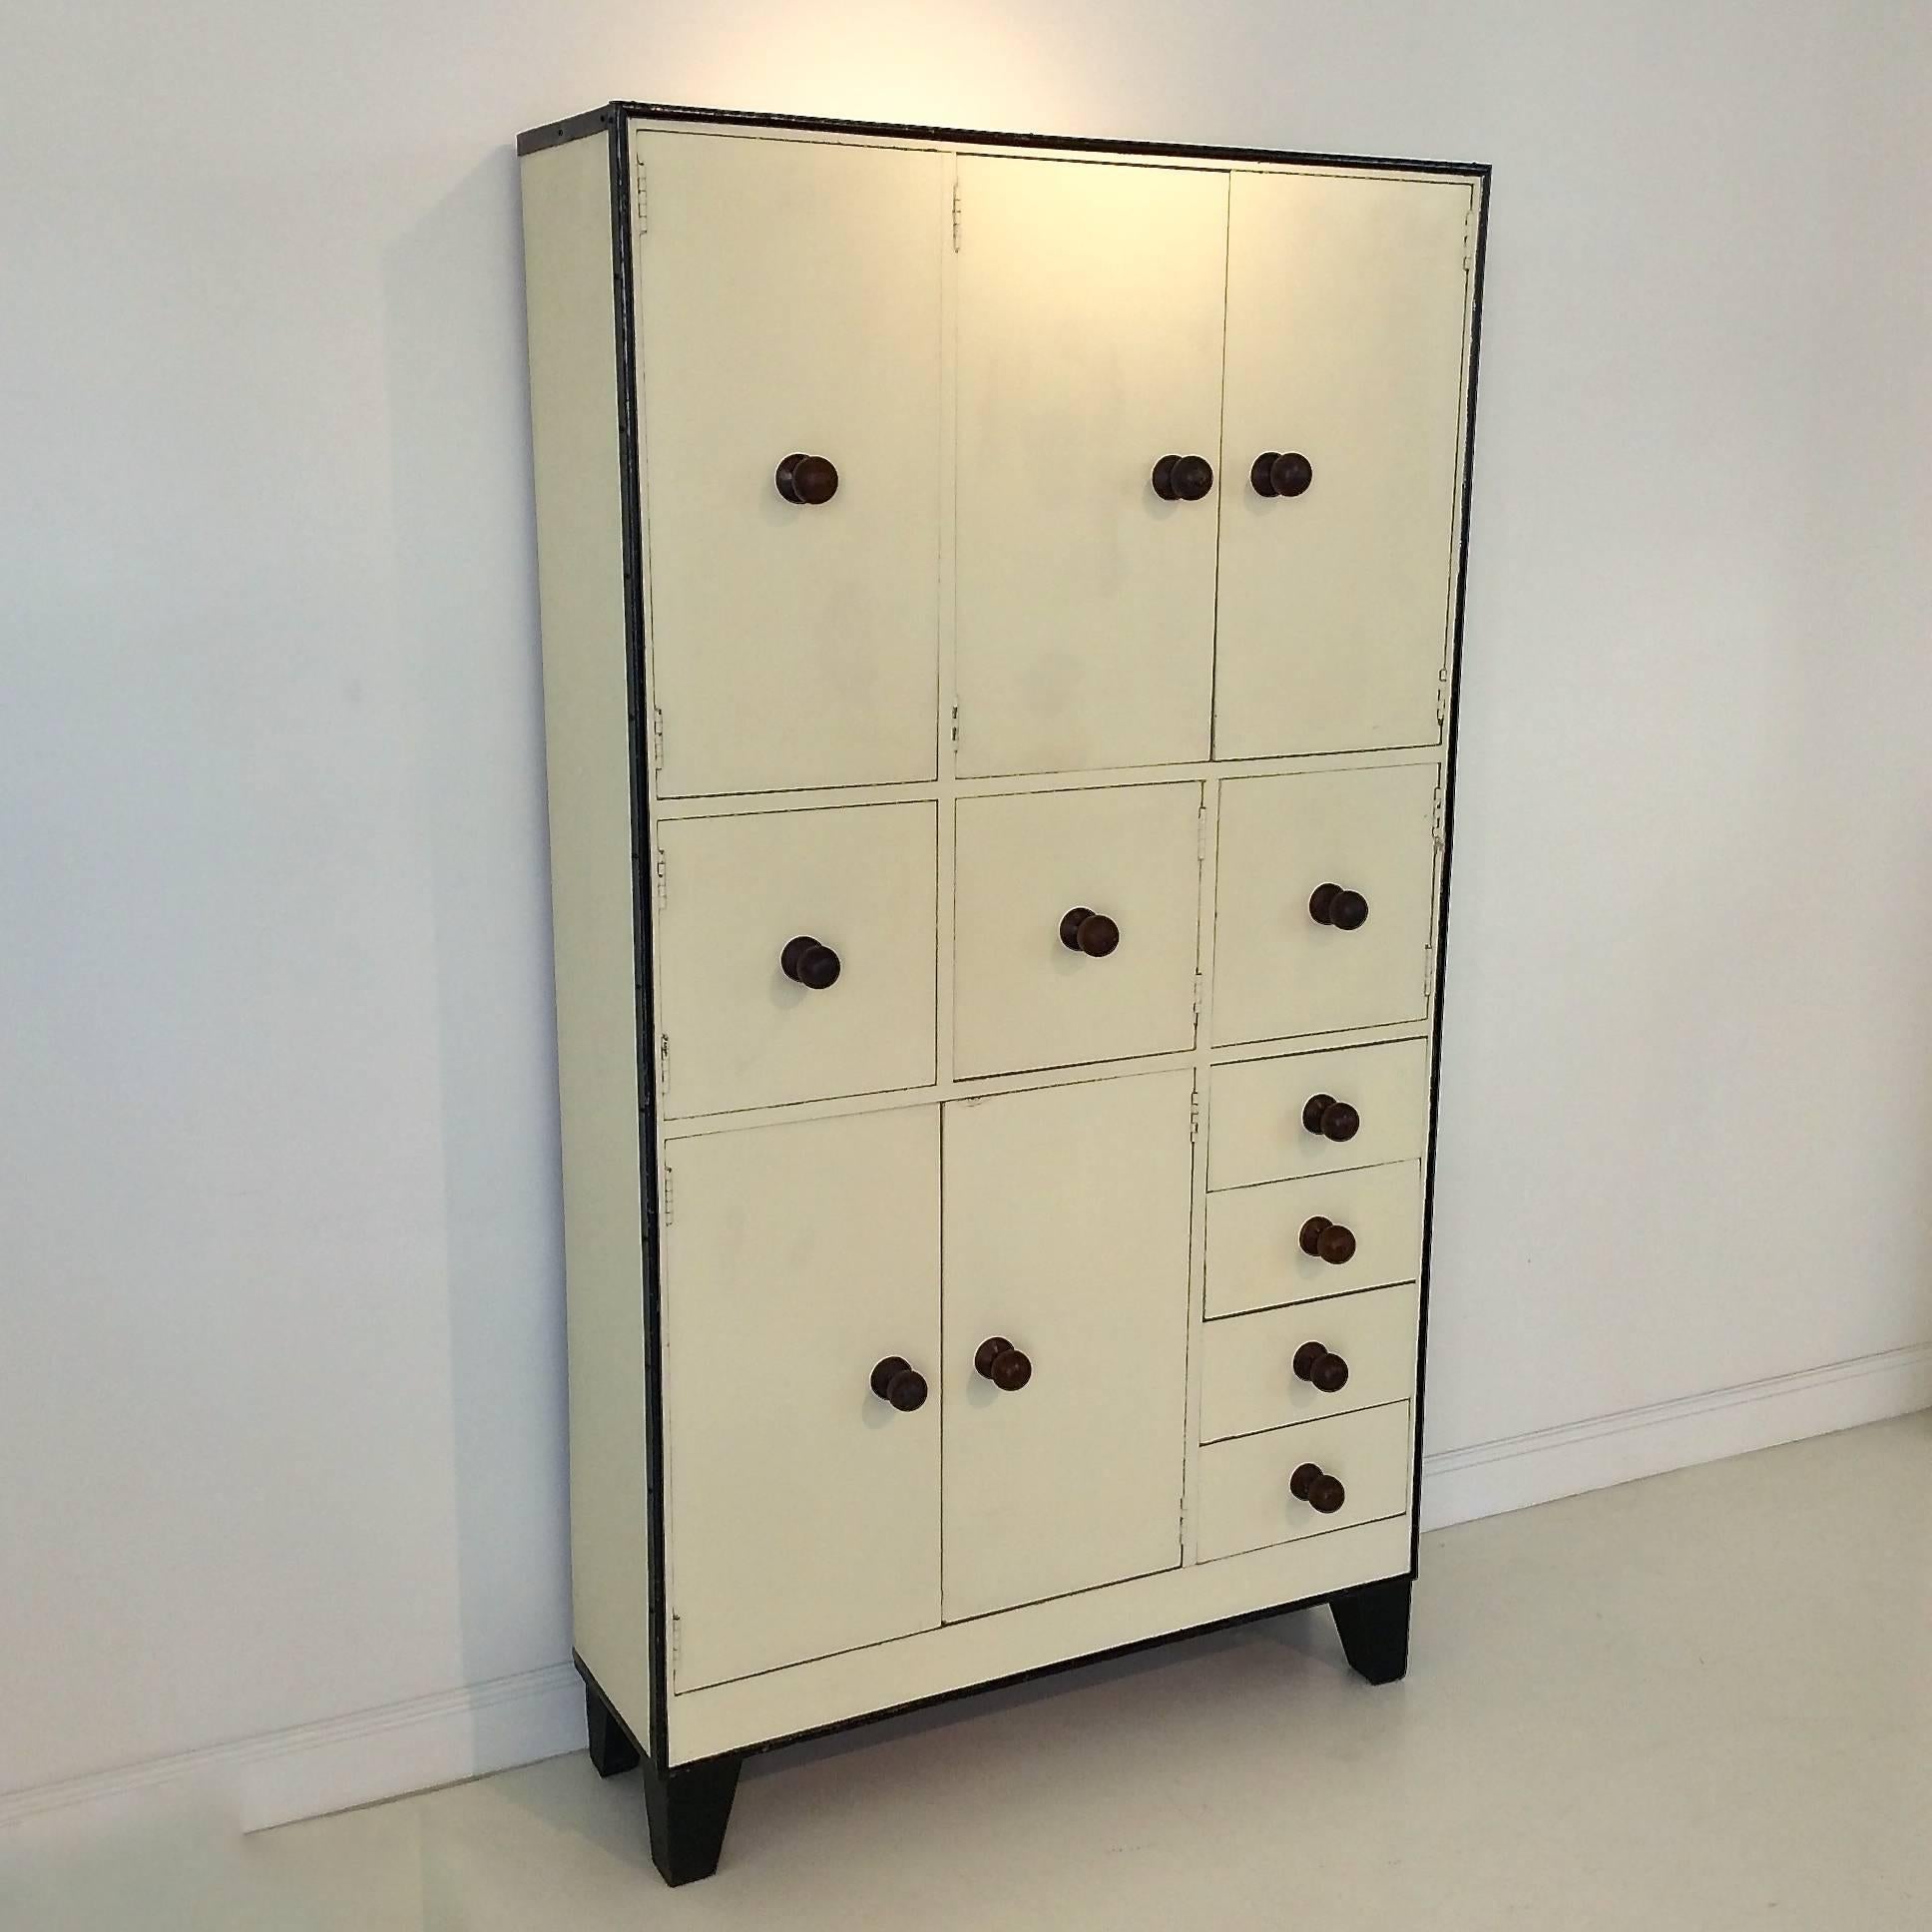 Ivory painted cabinet, probably Dutch, circa 1930.
Eight doors and four drawers.
Painted wood, black metal frame.
Wood handles balls.
Dimensions: H 201 cm, W 111 cm, D 33 cm.
Original condition, wear consistent with age and use.